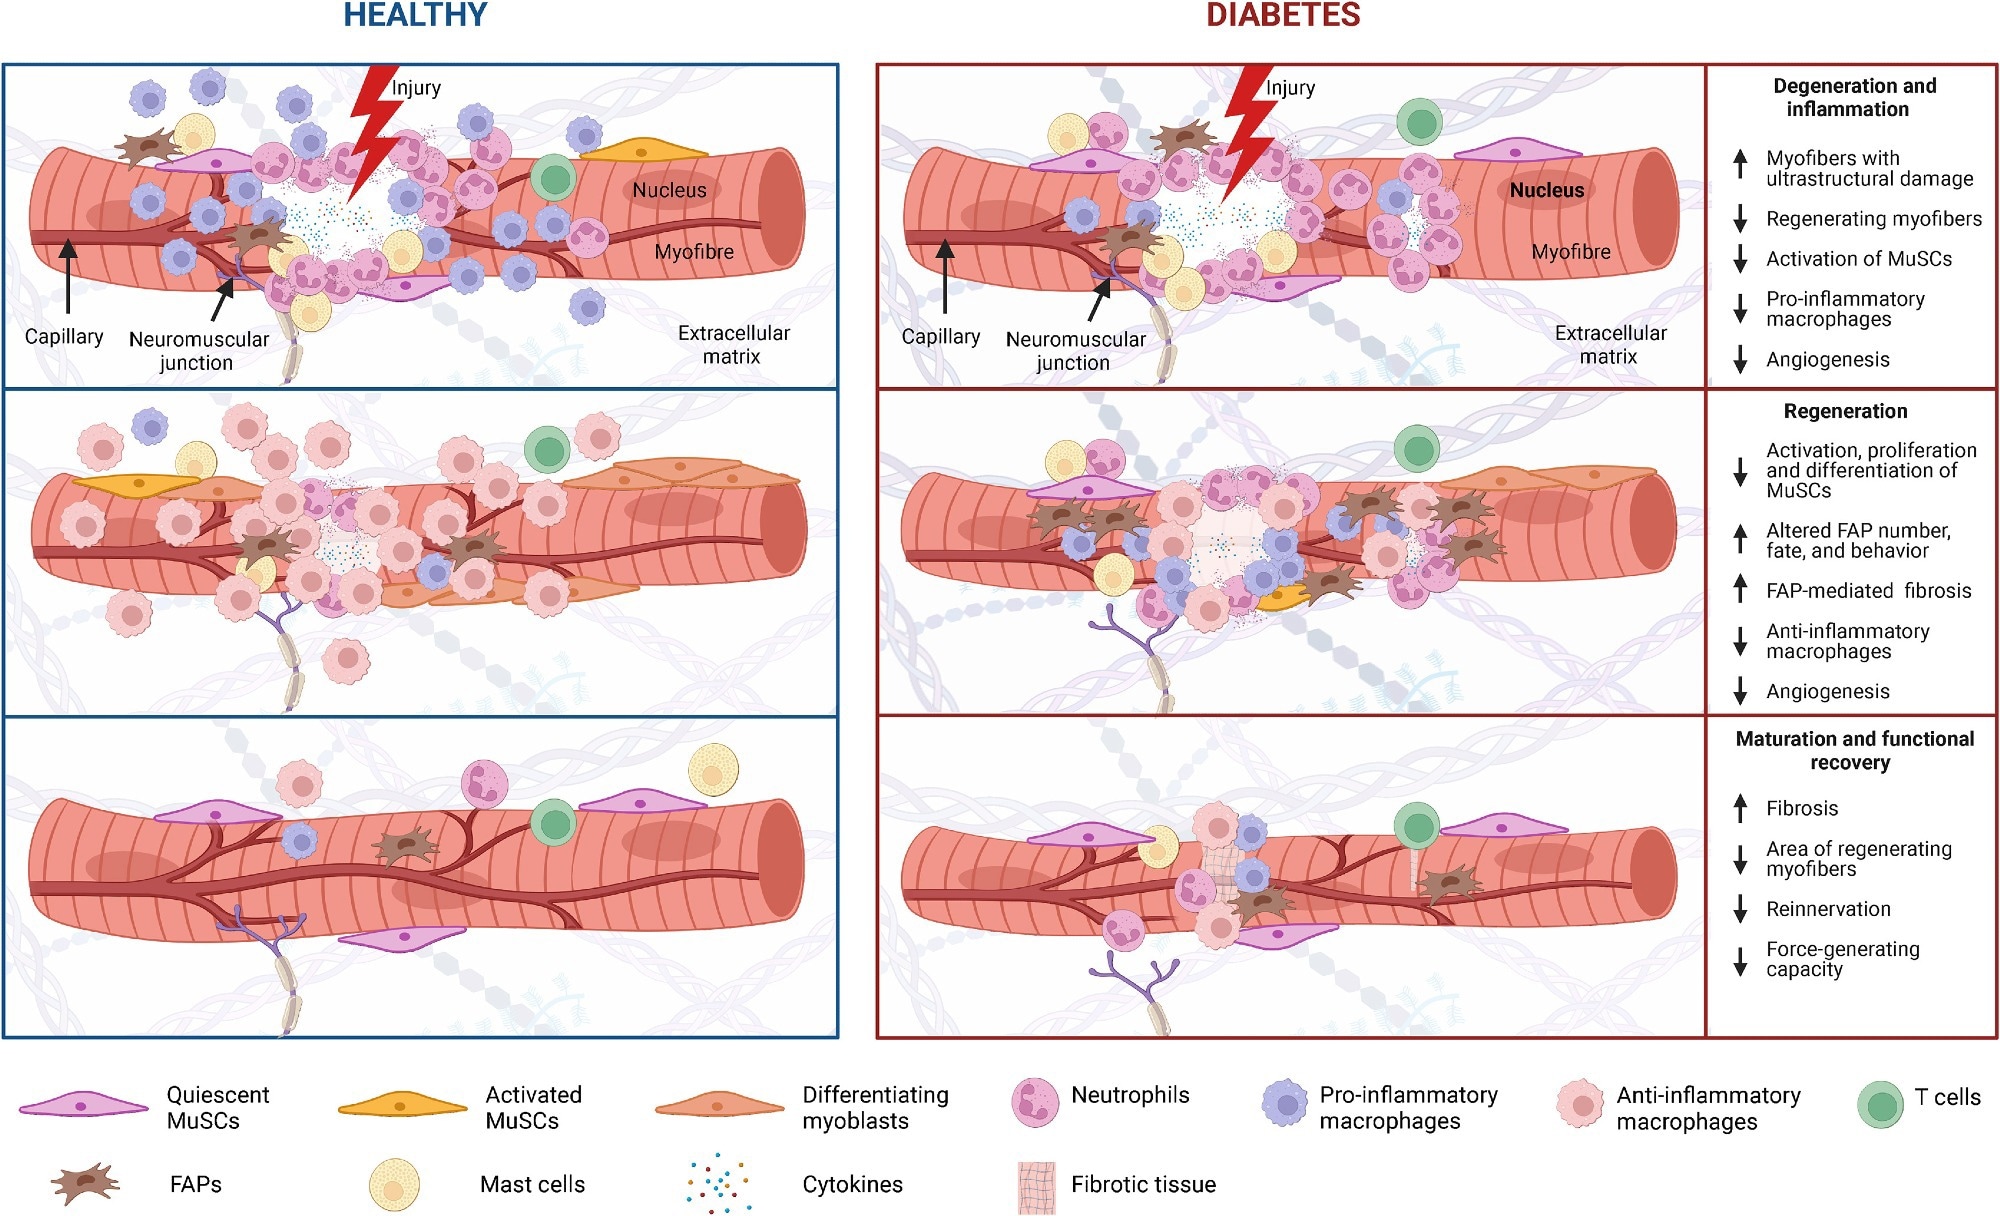 Skeletal muscle regeneration in diabetes Diabetes and its associated complications, including obesity and hyperglycemia, impact multiple cell populations (MuSCs, neutrophils, macrophages, T cells, FAPs, and mast cells) that play a vital role in the process of muscle regeneration (i.e., degeneration and inflammation, regeneration, and maturation and functional recovery).